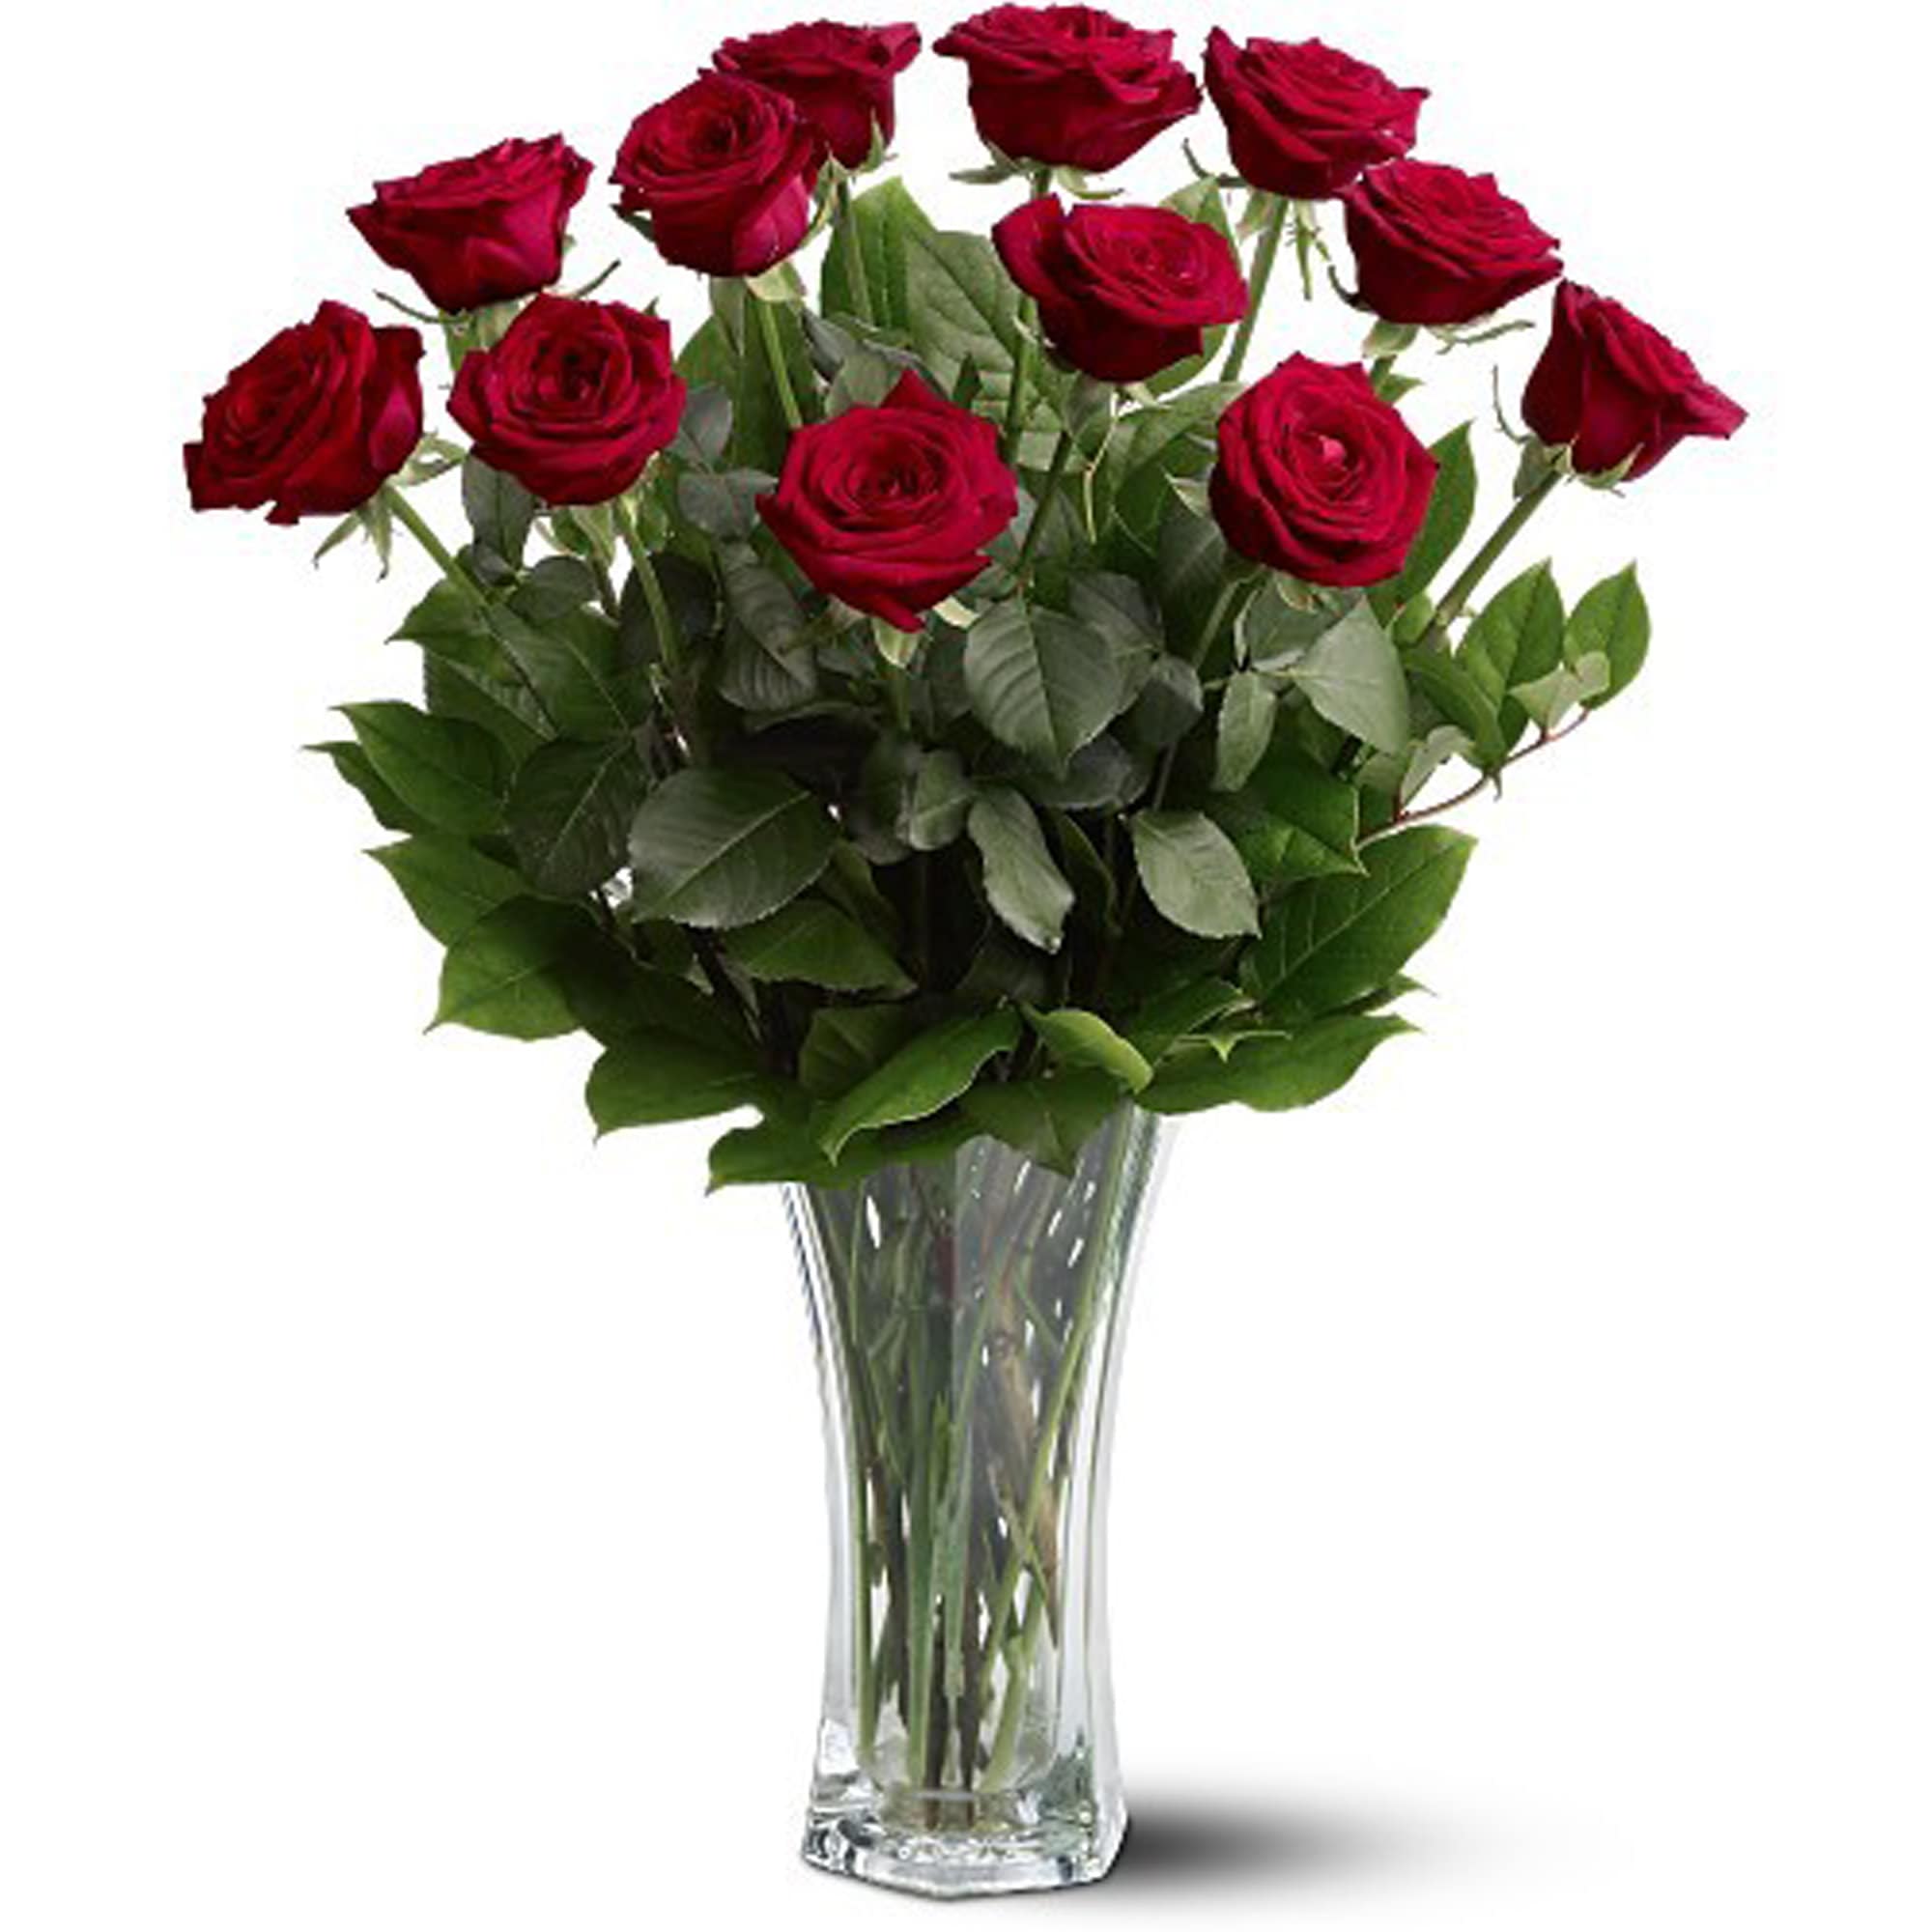 Classic Dozen Red Roses #12  - For classic romance, a dozen red roses is always the perfect choice.  One dozen  red roses in a clear glass vase.  Approximately 20&quot; W x 24&quot; H  Orientation: All-Around  